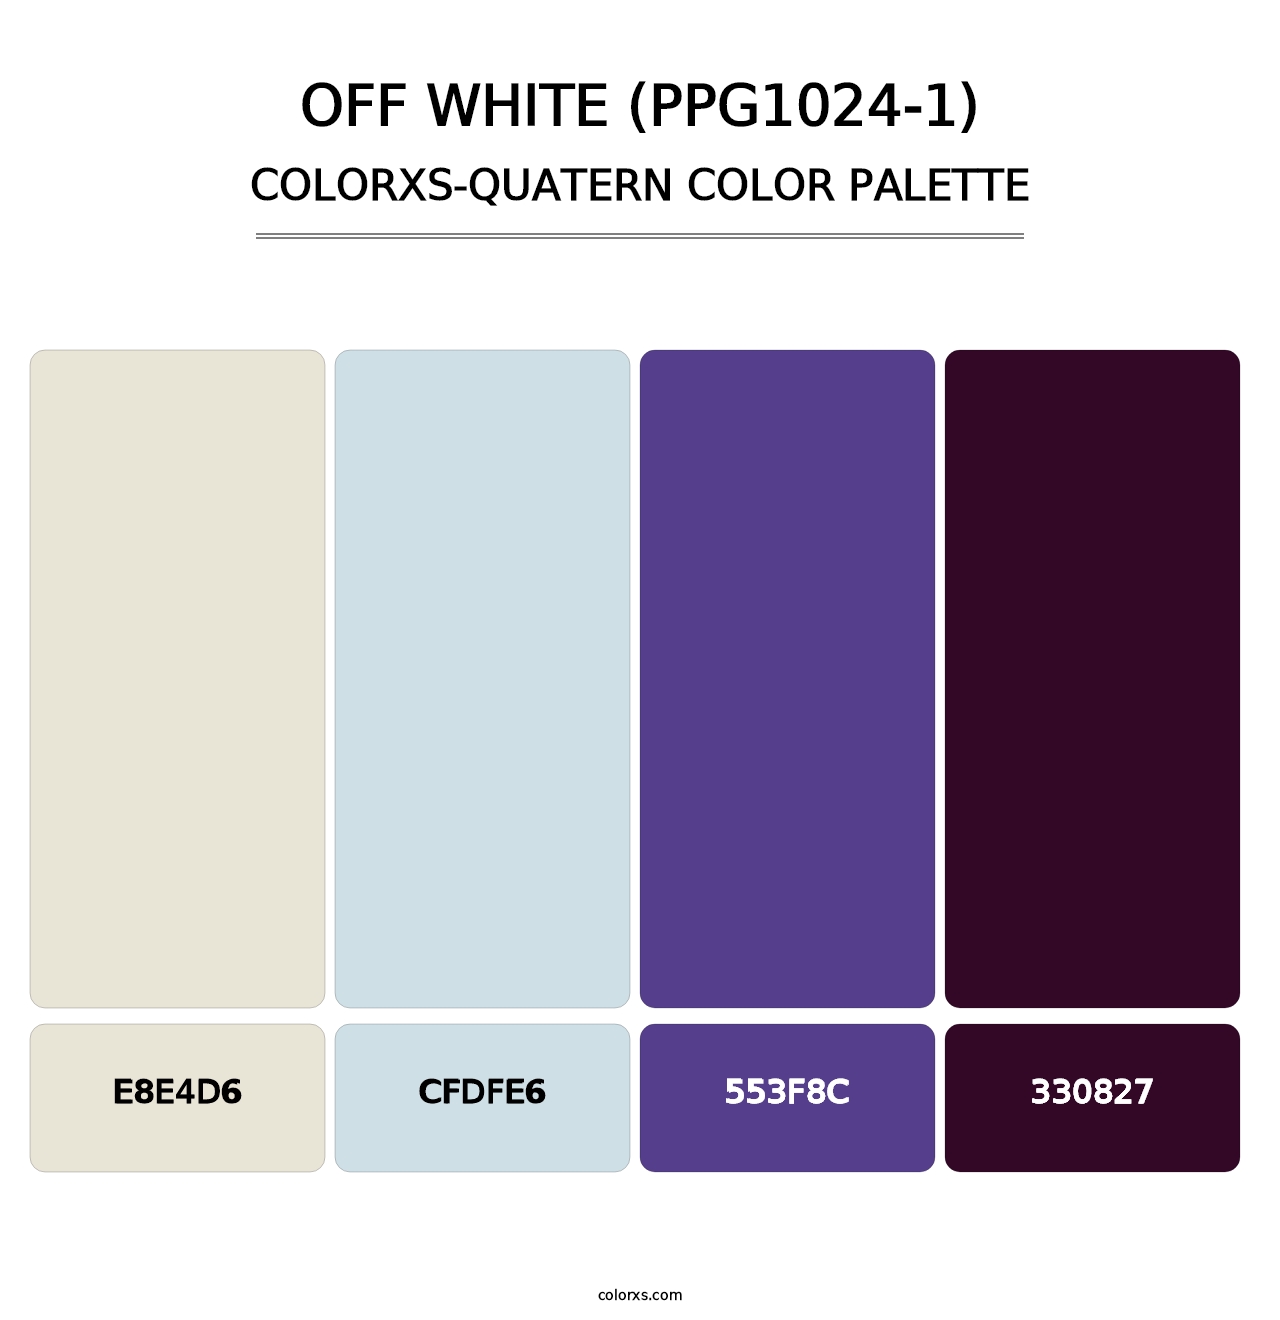 Off White (PPG1024-1) - Colorxs Quatern Palette